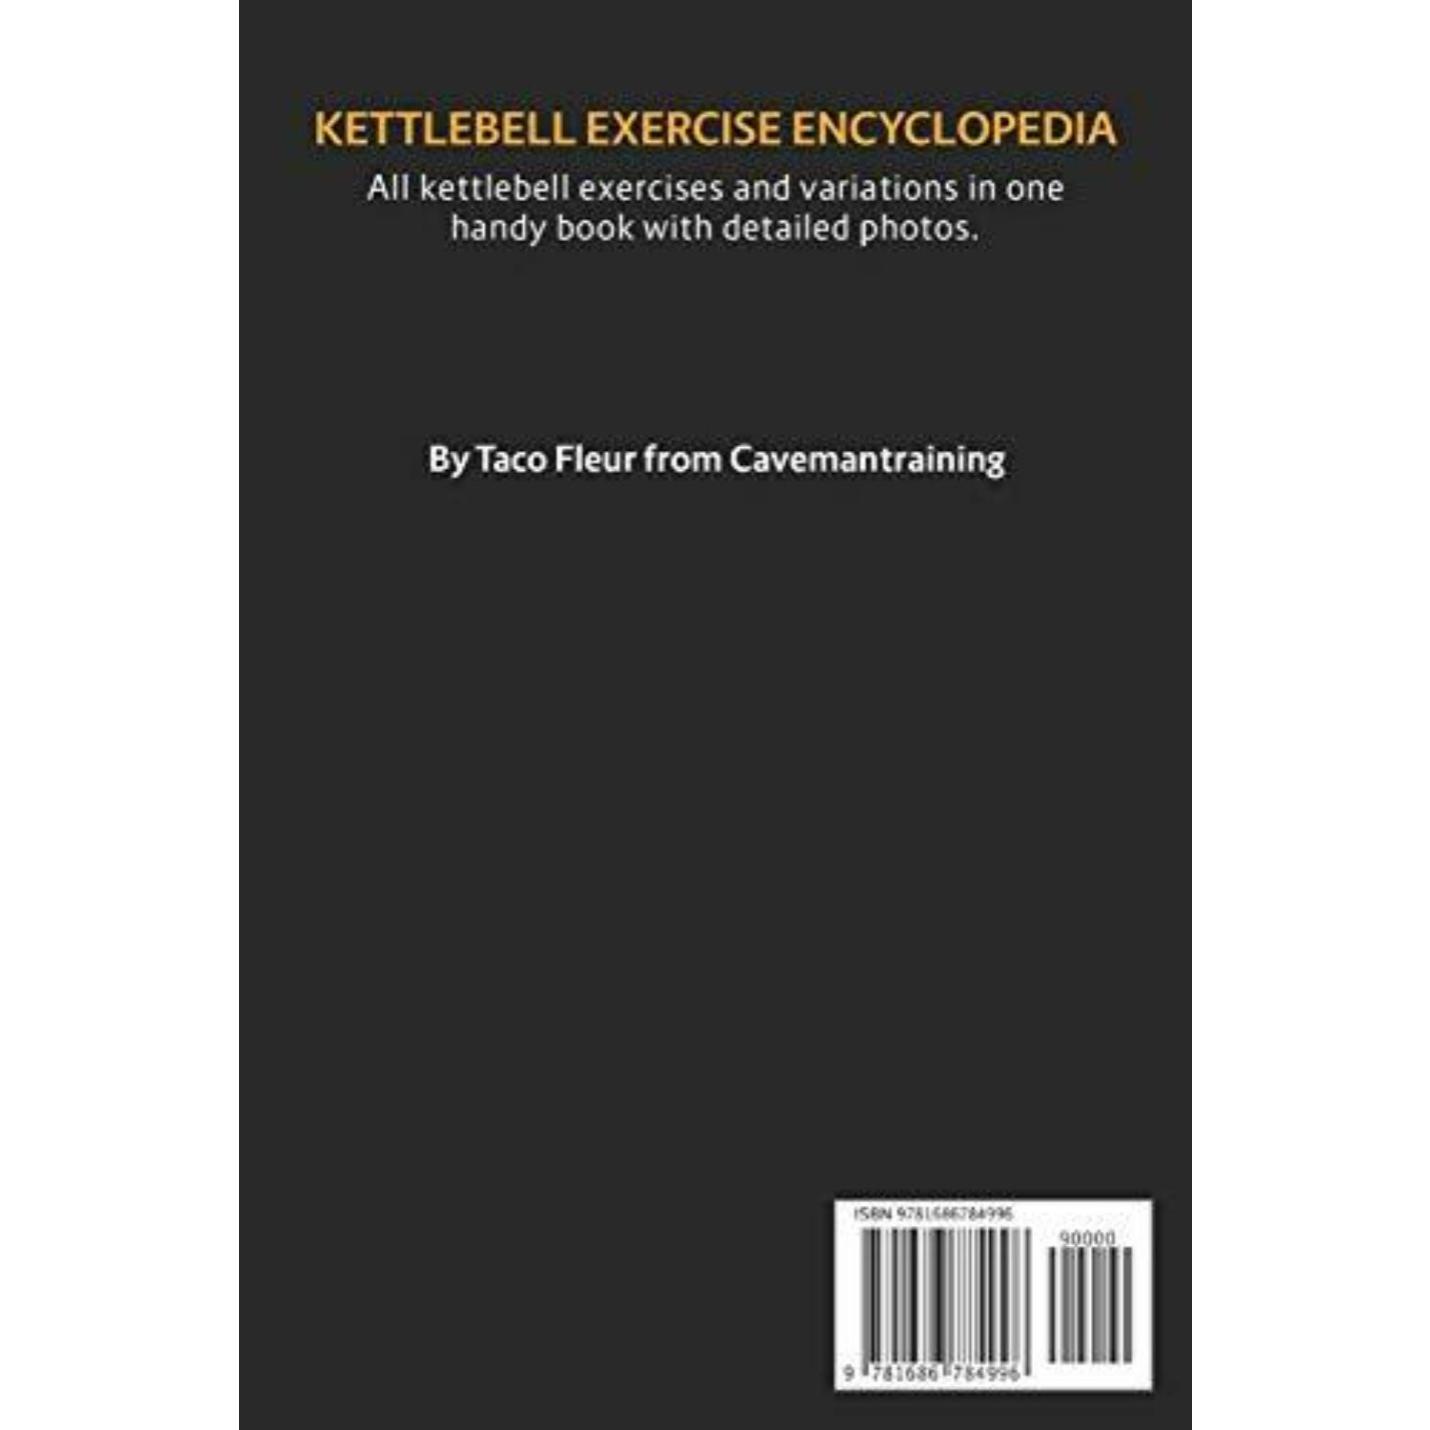 Kettlebell Exercise Encyclopedia VOL. 4: Kettlebell squat, swing, and windmill exercise variations - kettlebell oefeningen - happygetfit.com